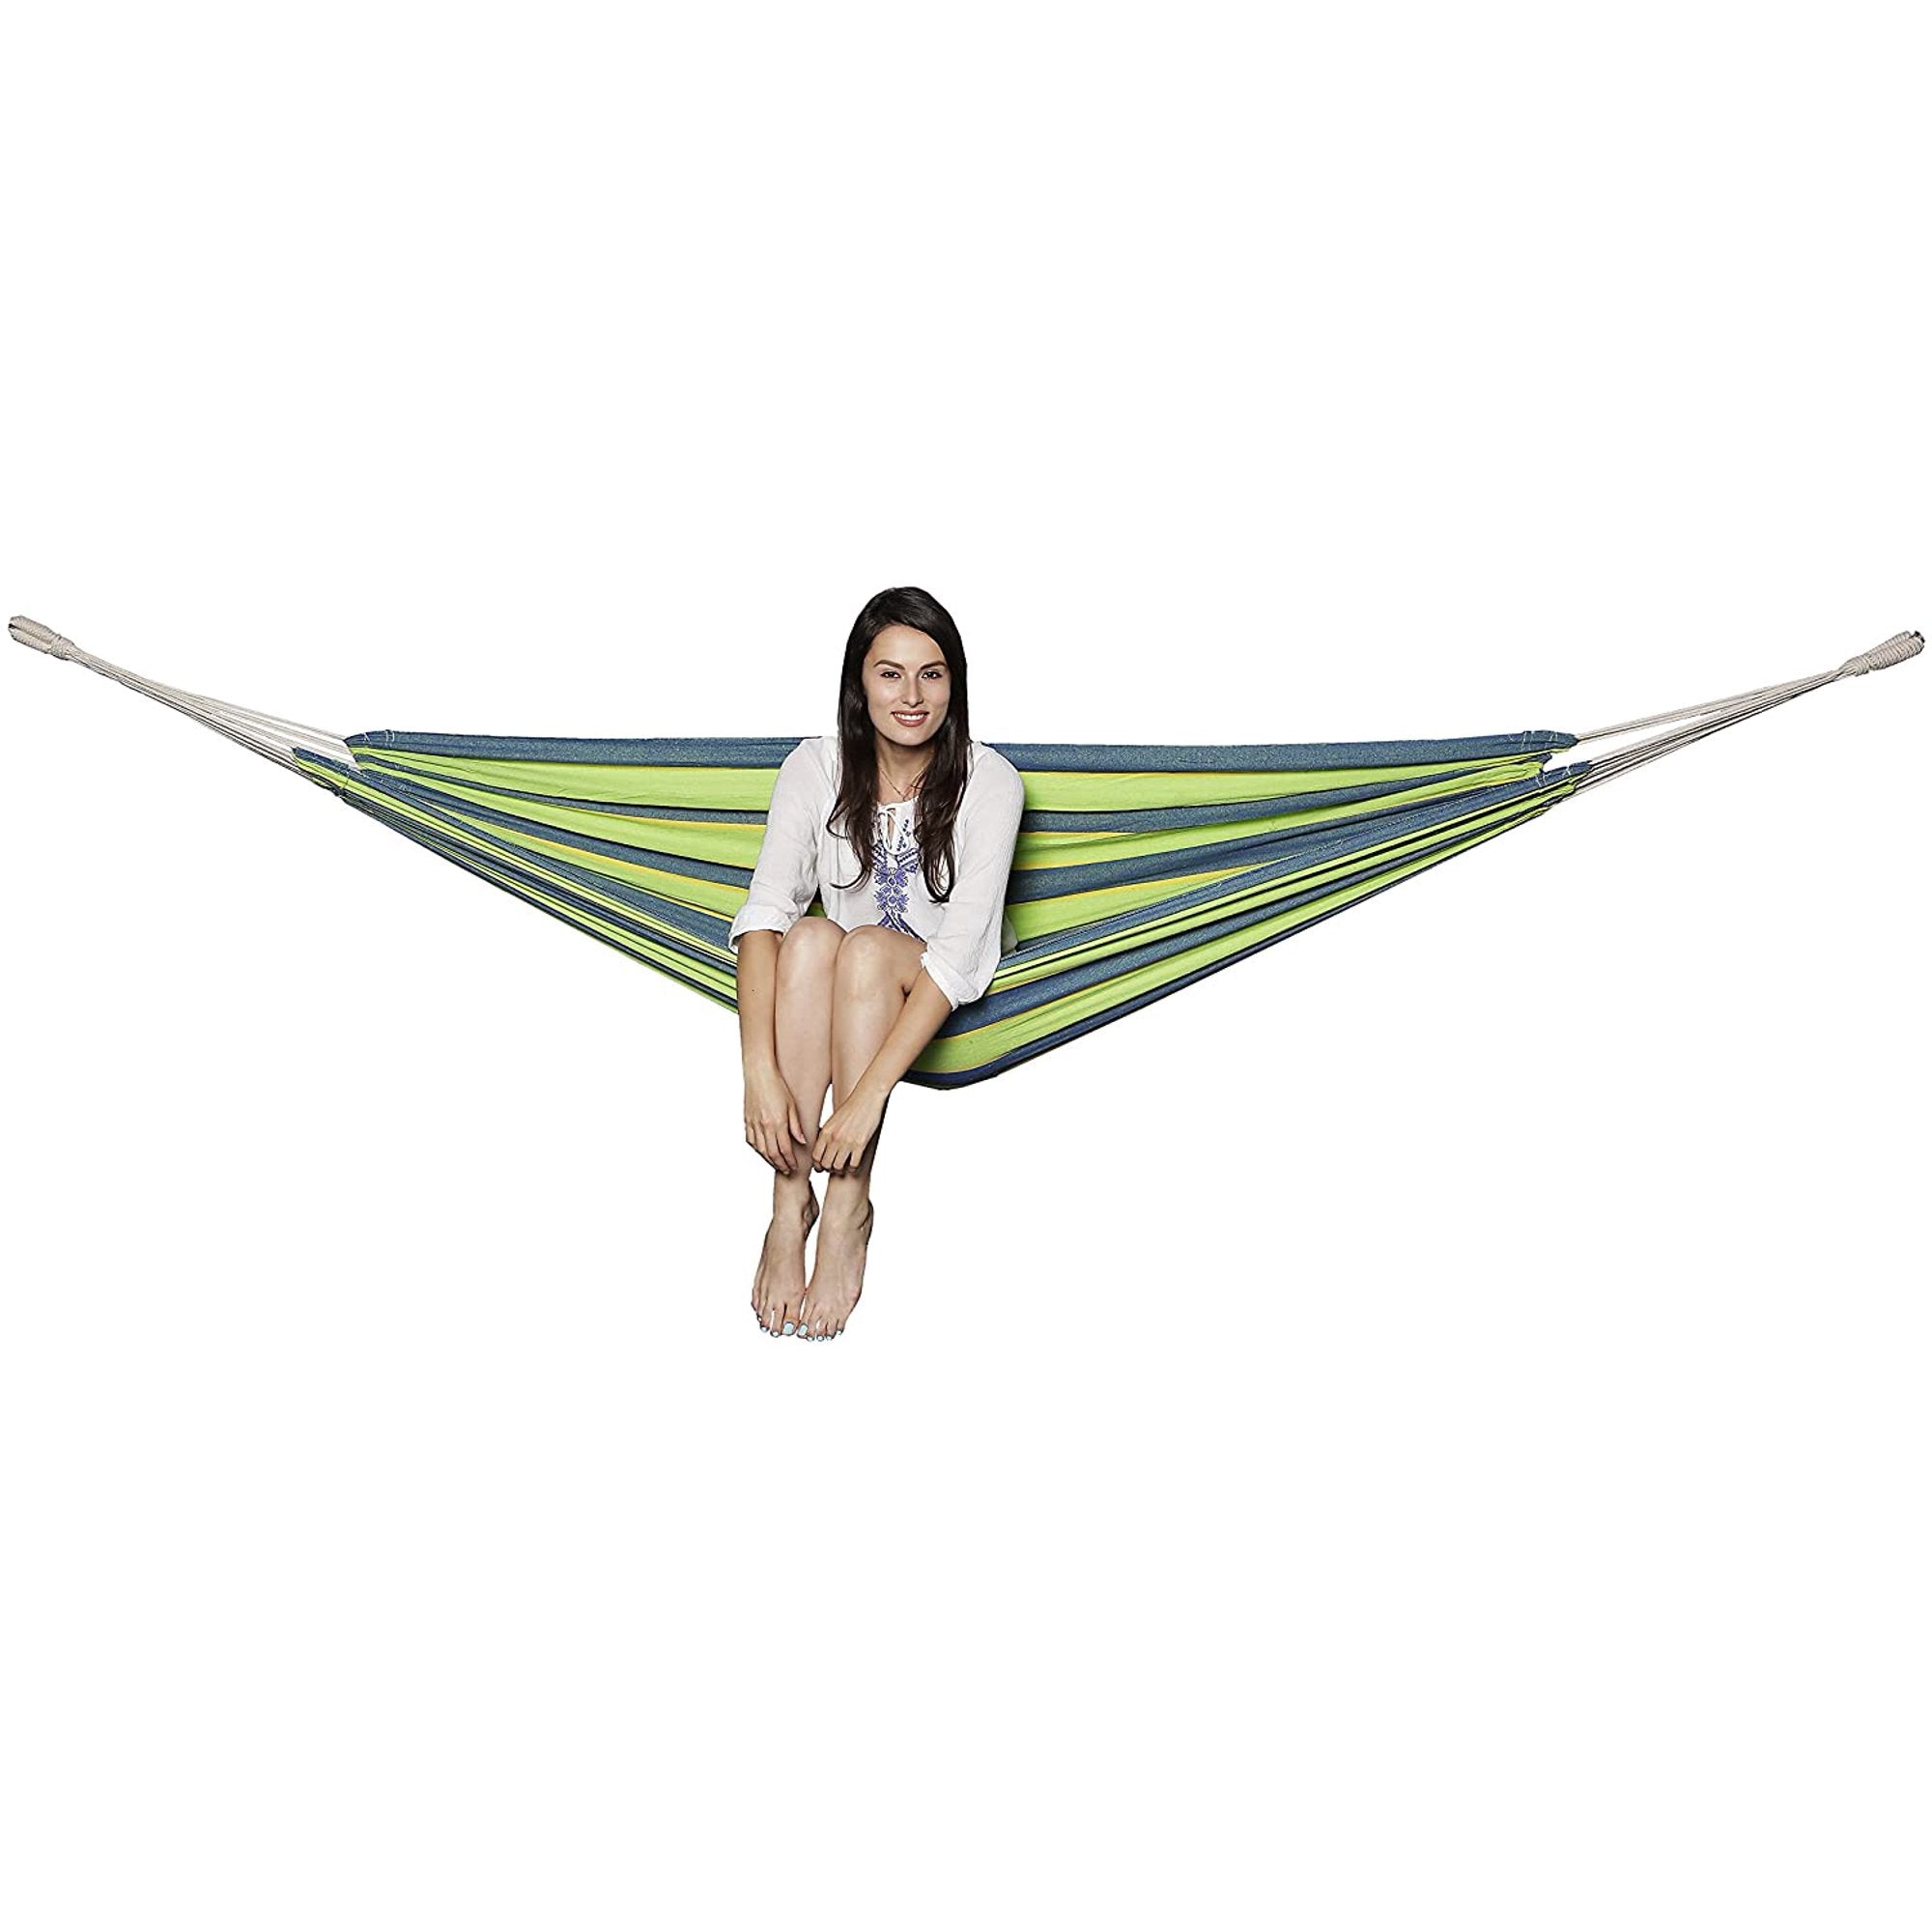 Gilbin Cotton Double Hammock Portable 2 Person Durable Extra Large Canvas Hammock, Canvas Double Brazilian Hammock, Perfect for Camping, Outdoors Gear, Backpack, Hiking, Hunting, Backyard